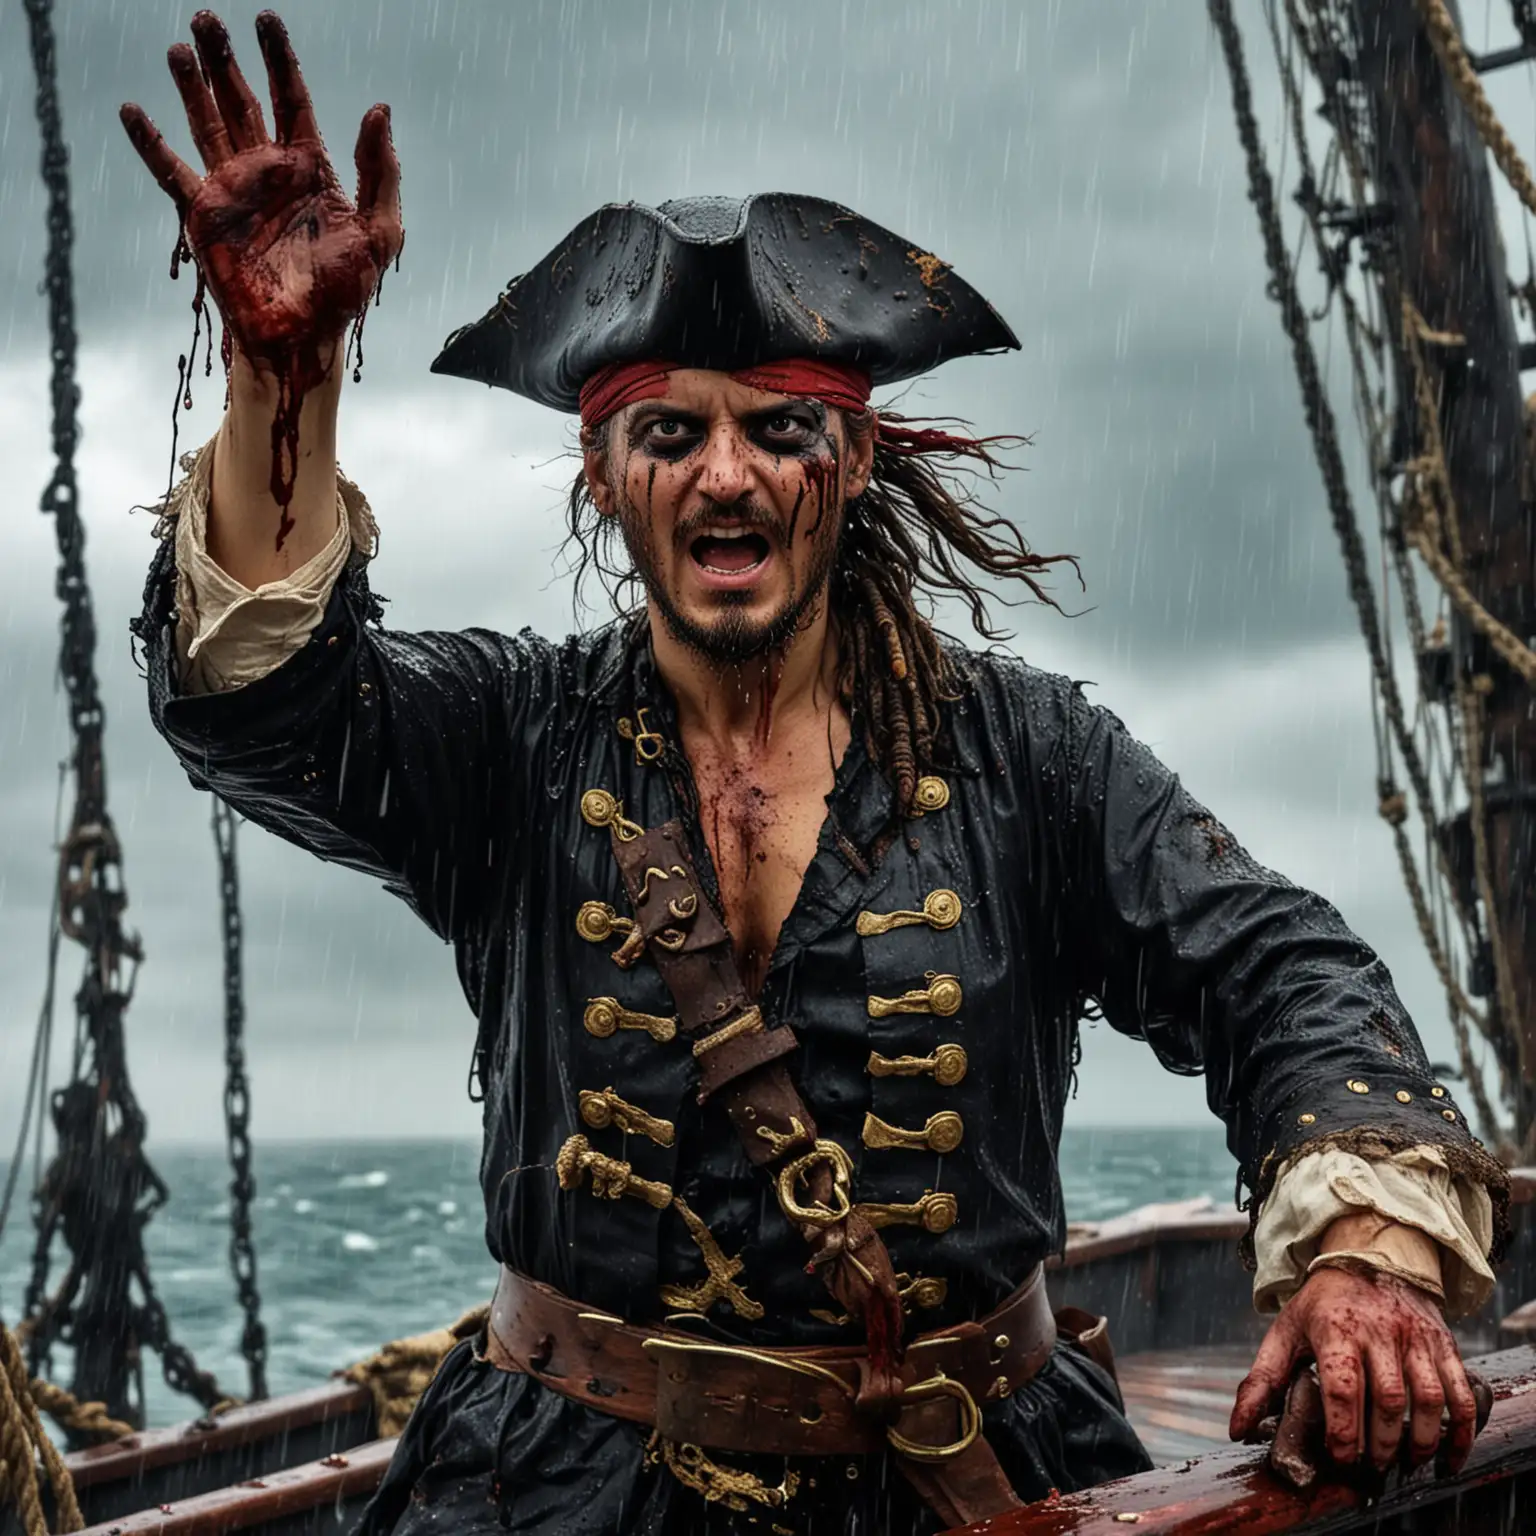 Fierce Pirate on Stormy Seas with Bloodied Hands